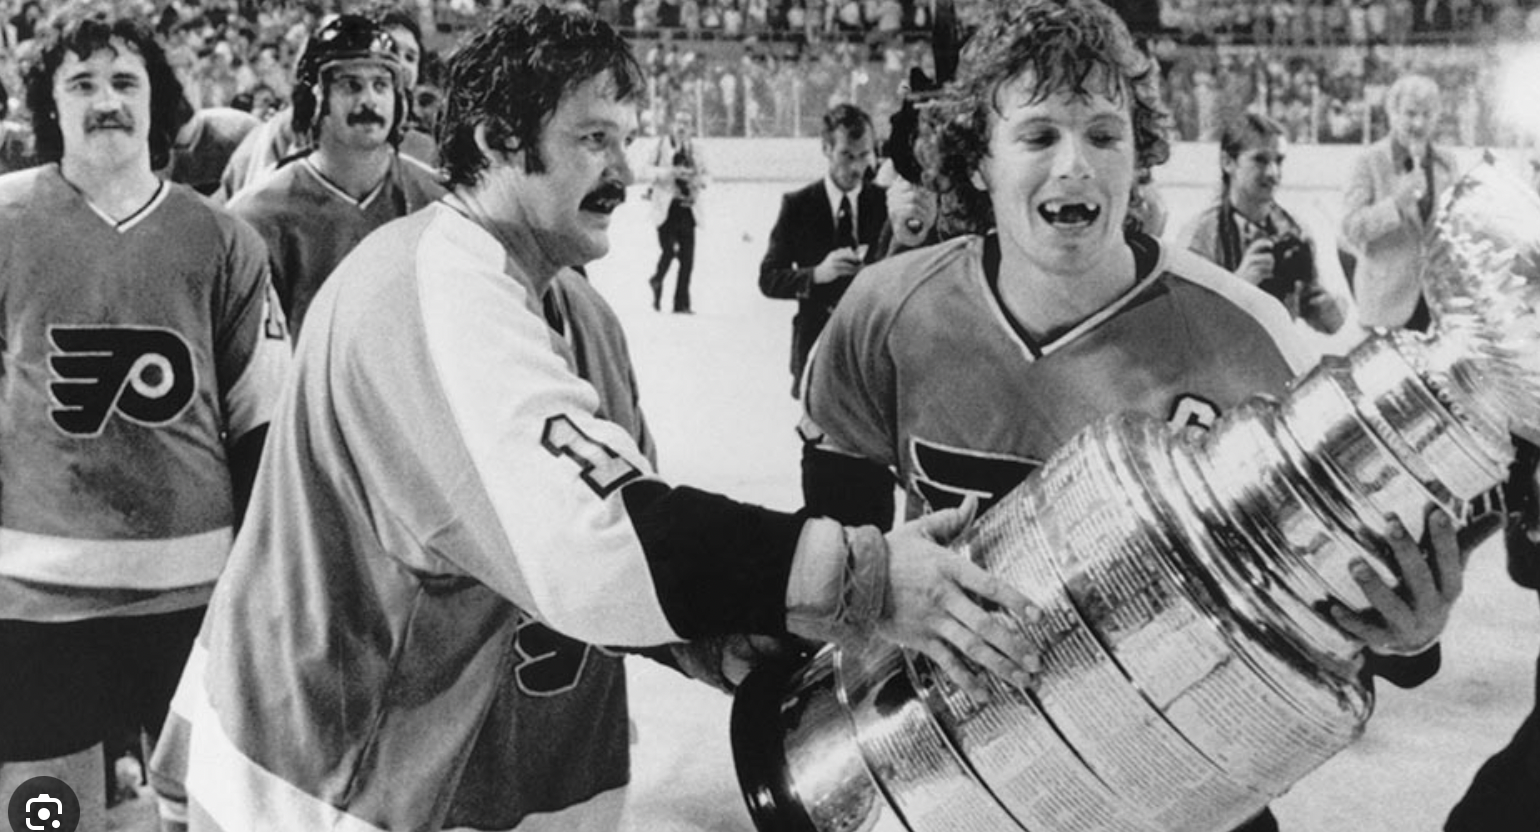 The Philadelphia Flyers' Bernie Parent, Bobby Clarke with the Stanley Cup ini1975.